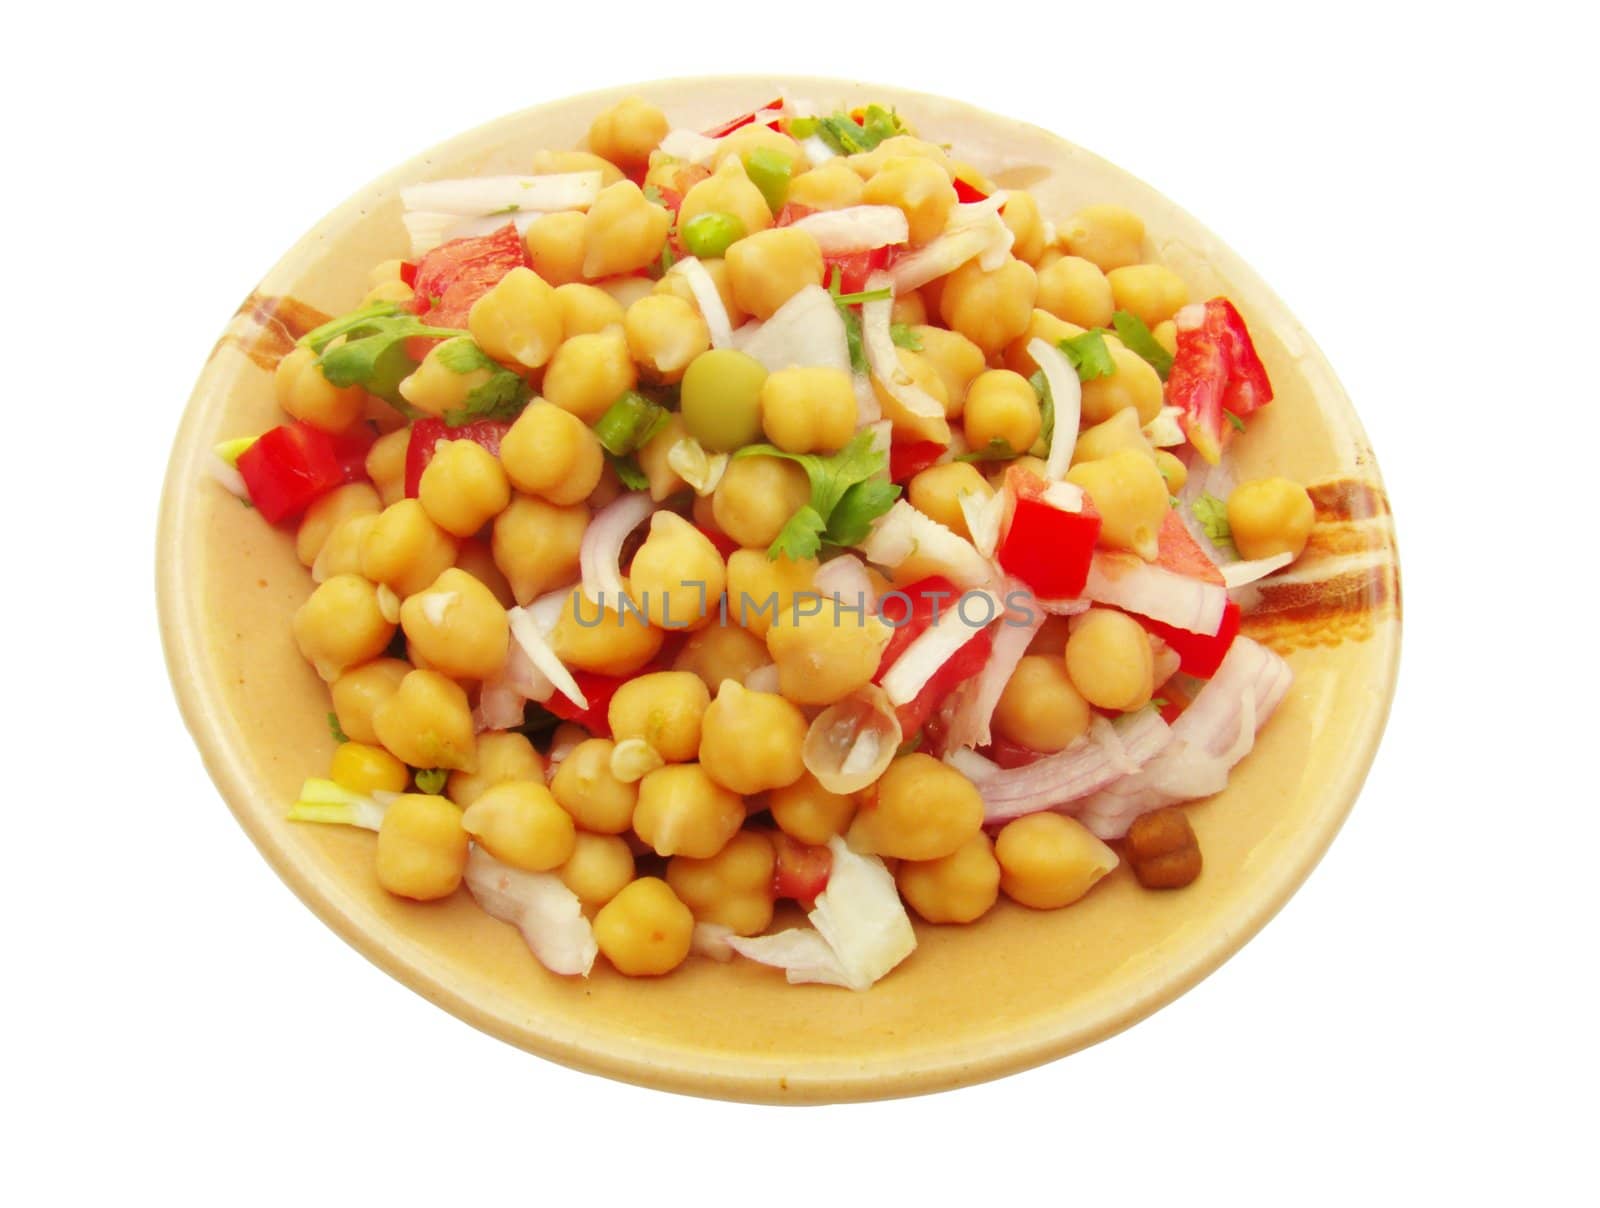 Salad prepared with chickpea (Cicer arietinum) also called Bengal gram and known with other commen names include garbanzo bean, ceci bean, chana, sanagalu, Gonzo Bean and Bengal gram. It most popular vegetarian foods in Indian sub continent having high protein content and dietary fiber.